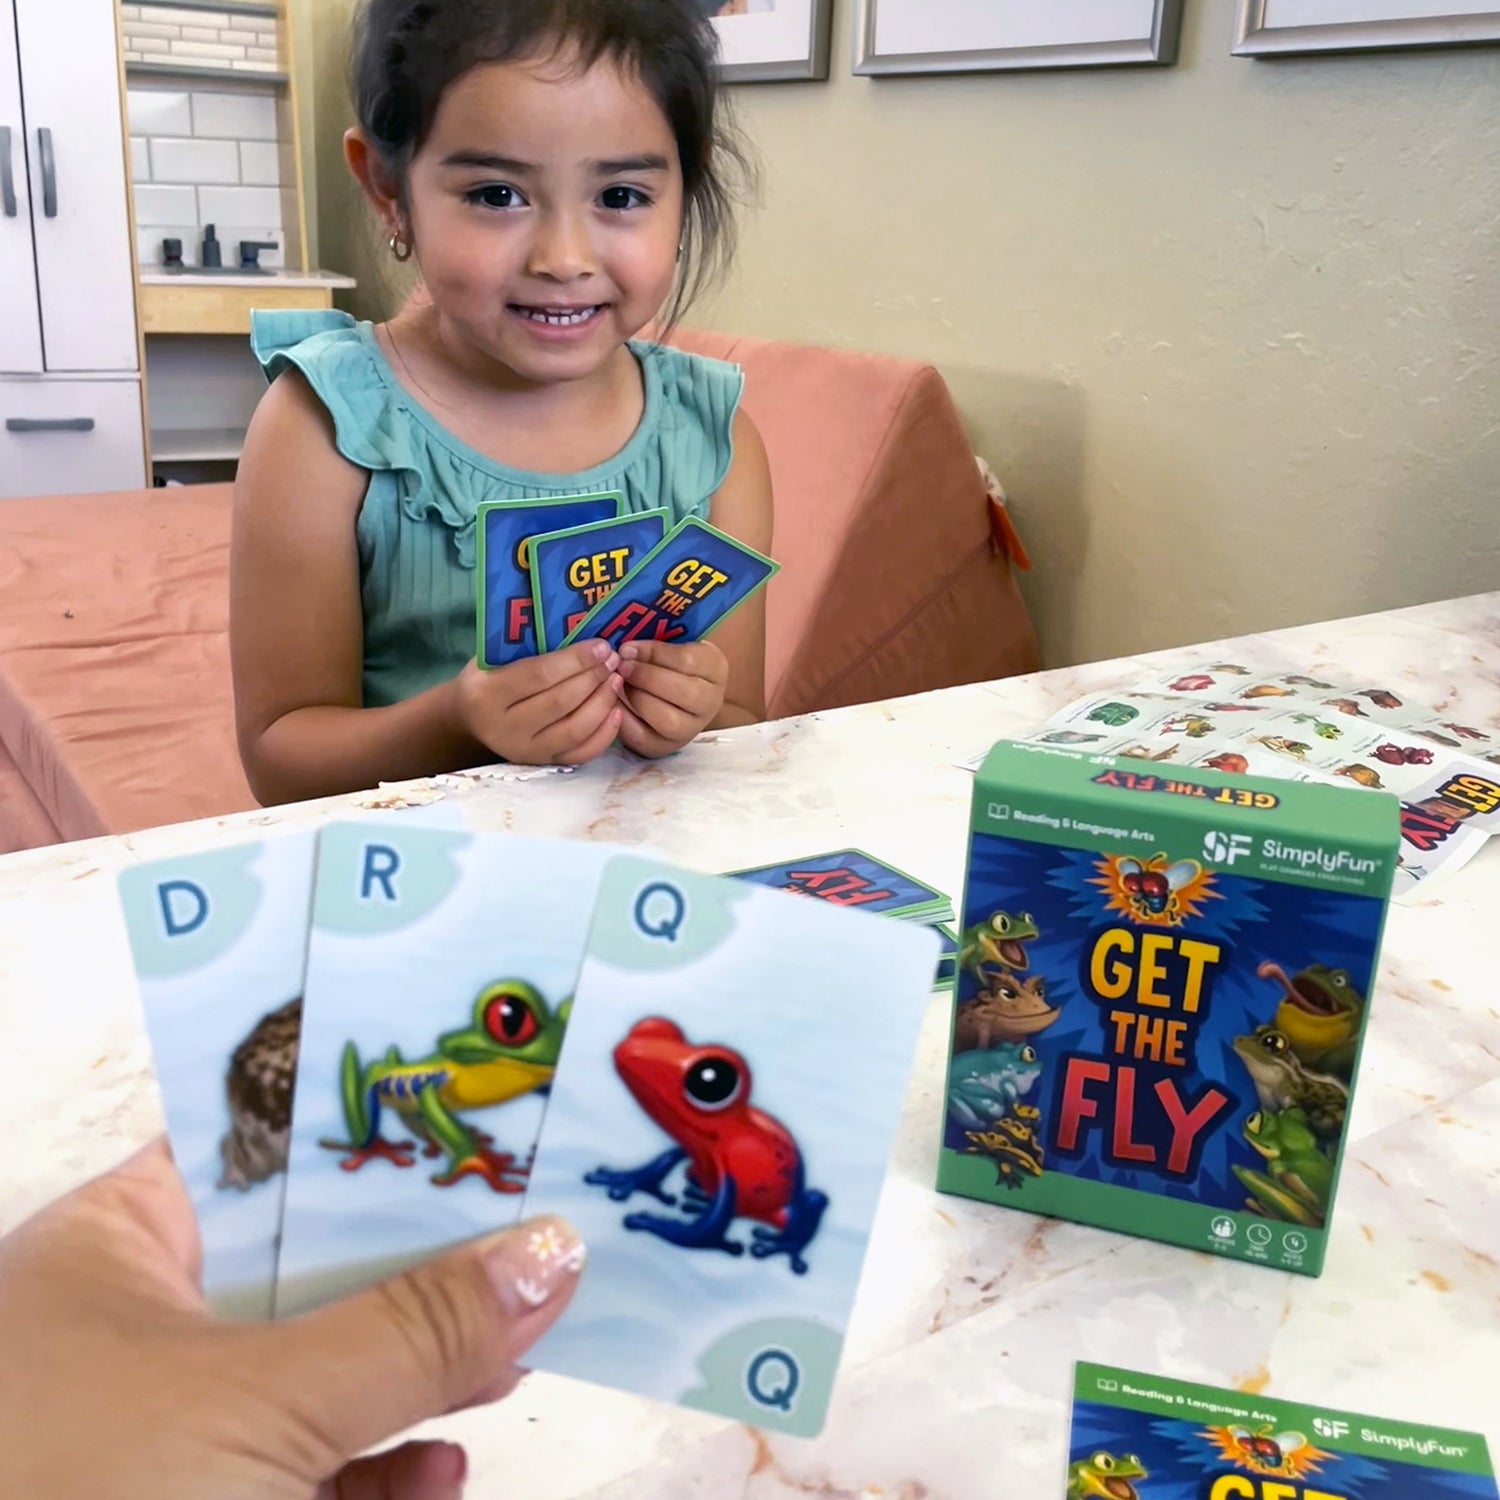 Kids on the Go Card Set by SimplyFun is a fun set of card games focused on colors, shapes, numbers, and letters.